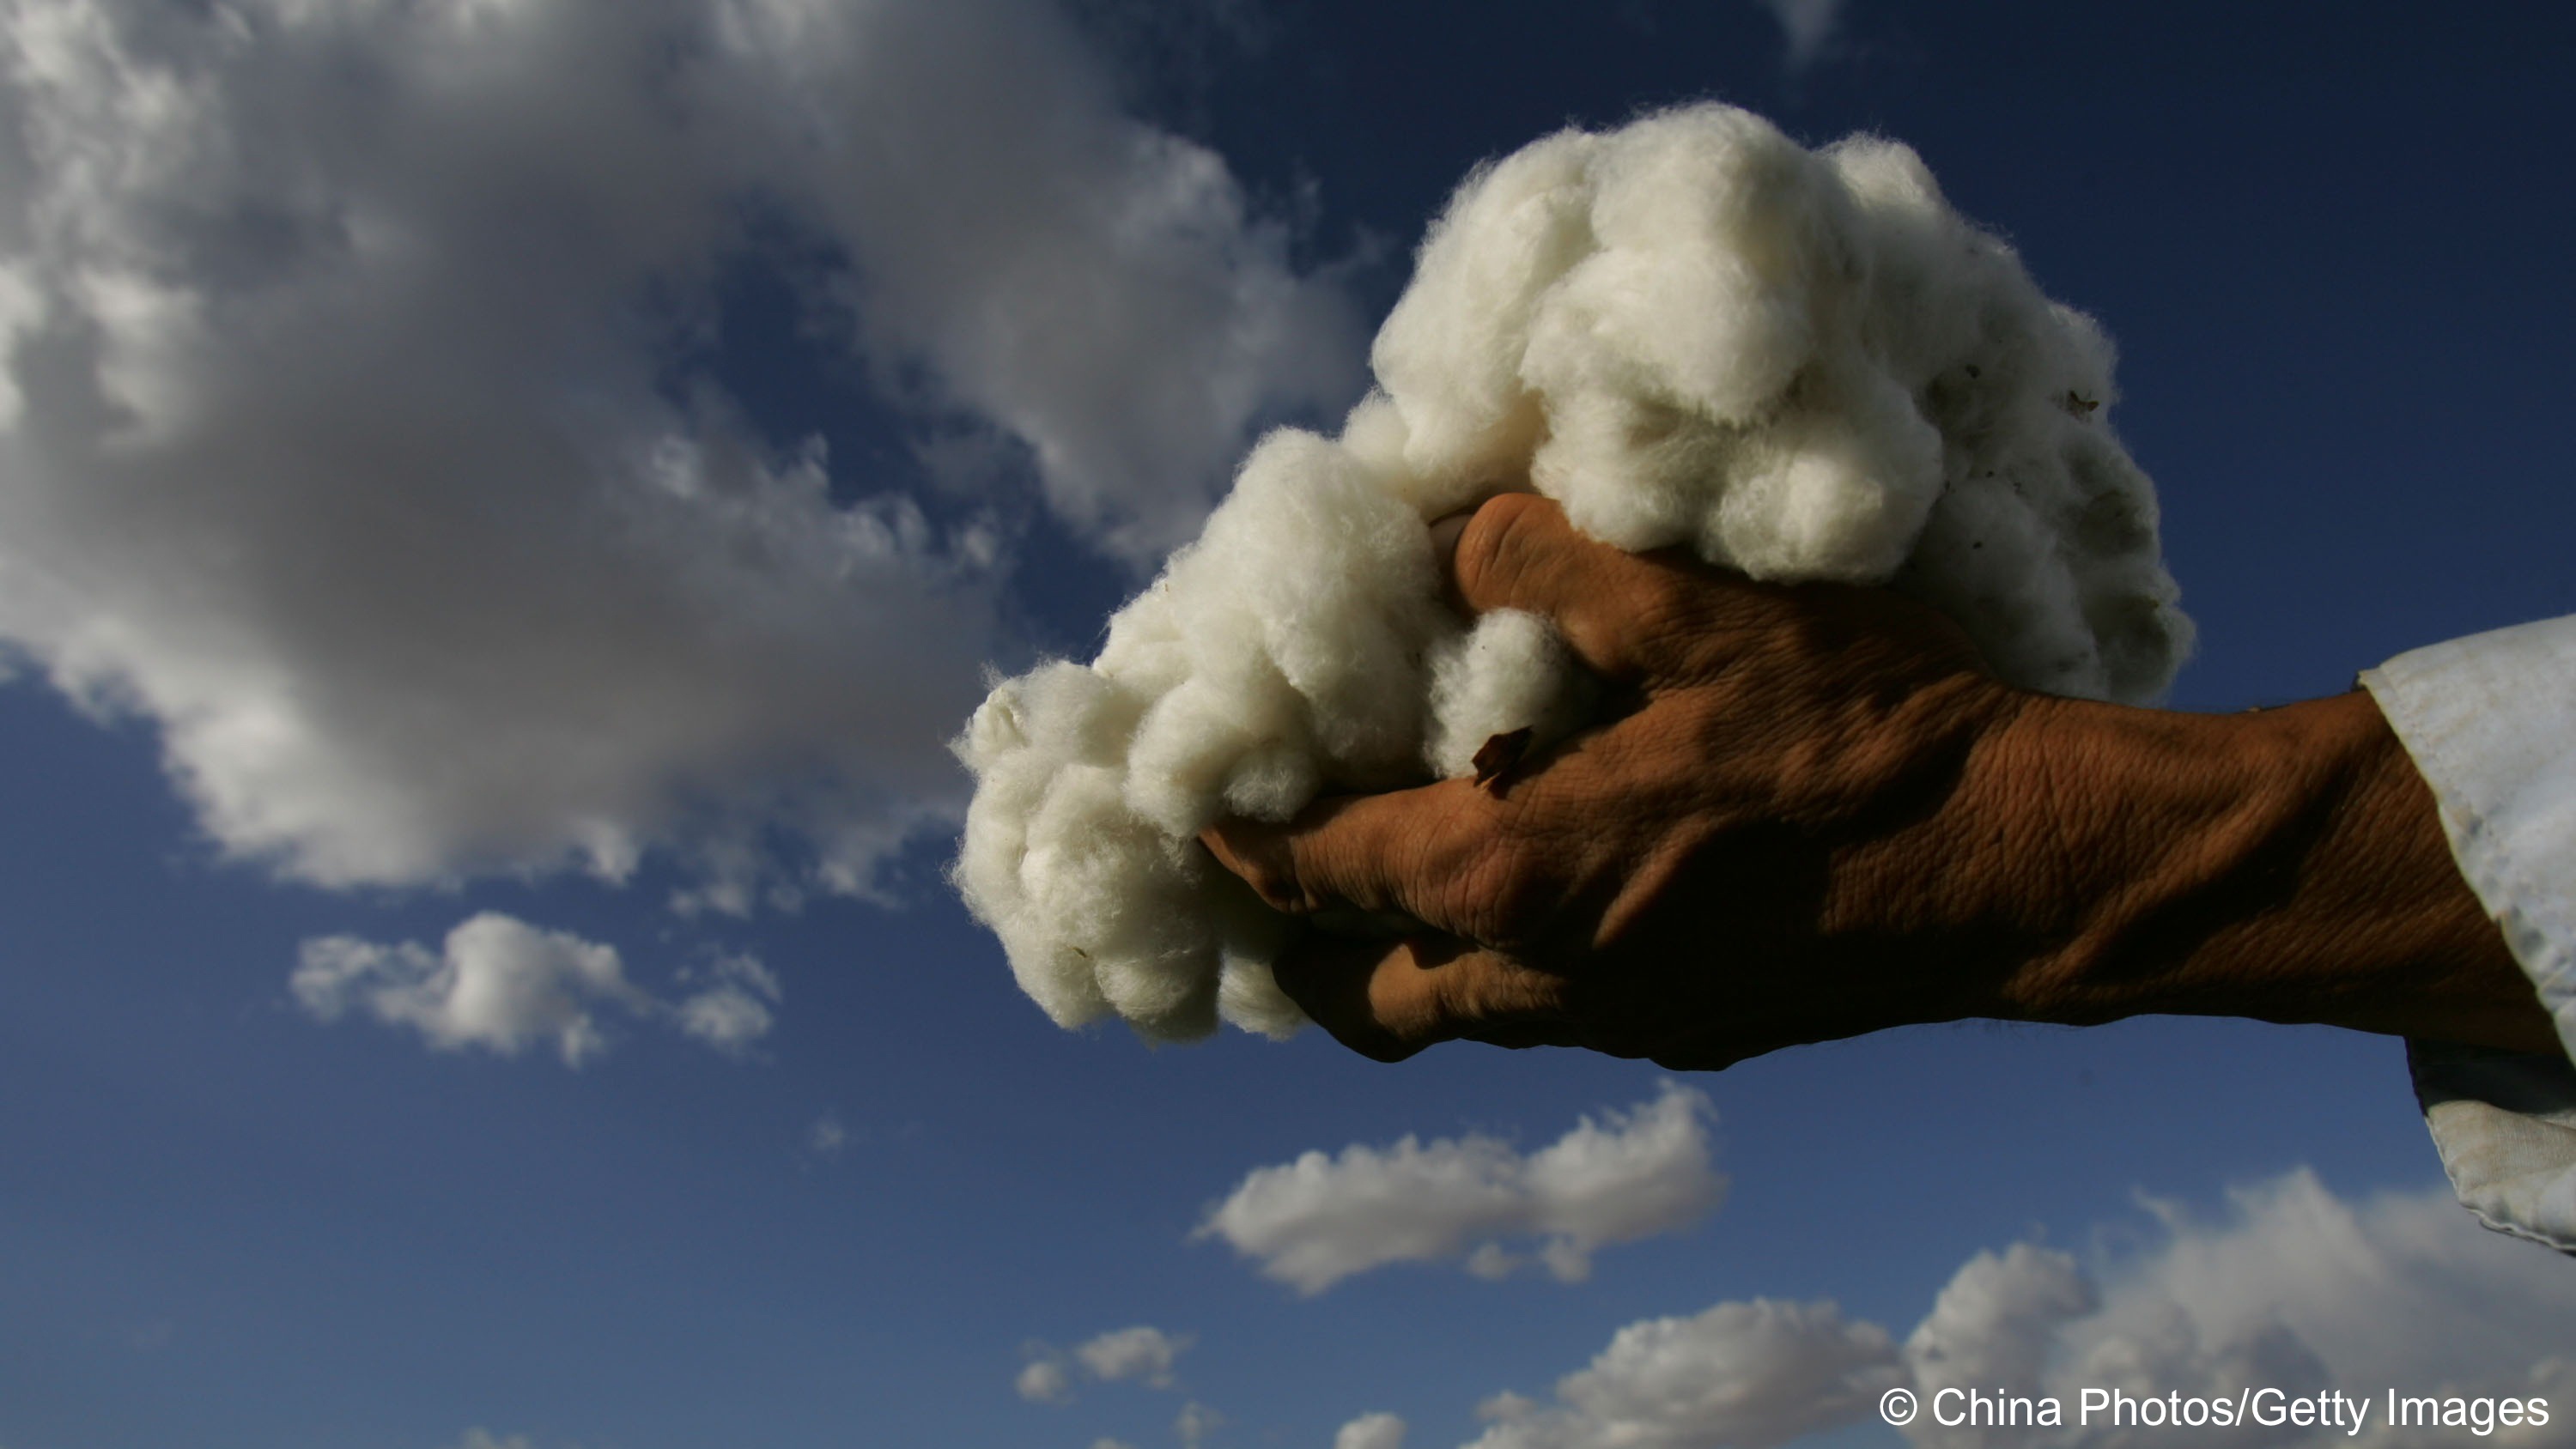 Over the past 10 years, cotton production has almost halved in Pakistan, from 13.6 million bales in 2011/12 to about 7 million in 2020/21.